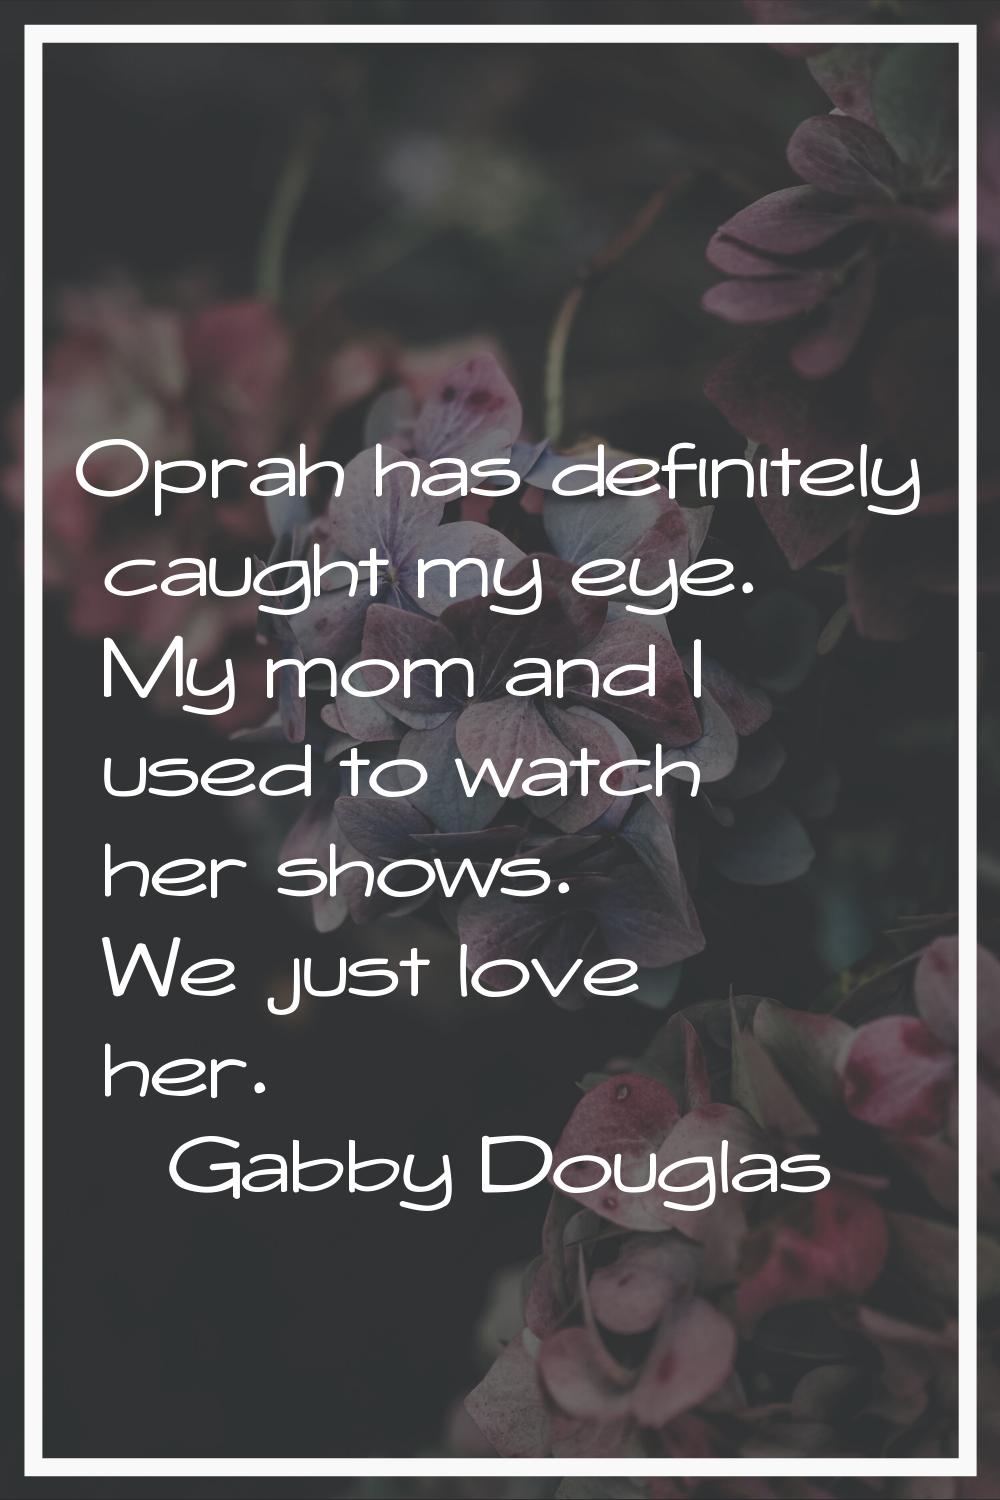 Oprah has definitely caught my eye. My mom and I used to watch her shows. We just love her.